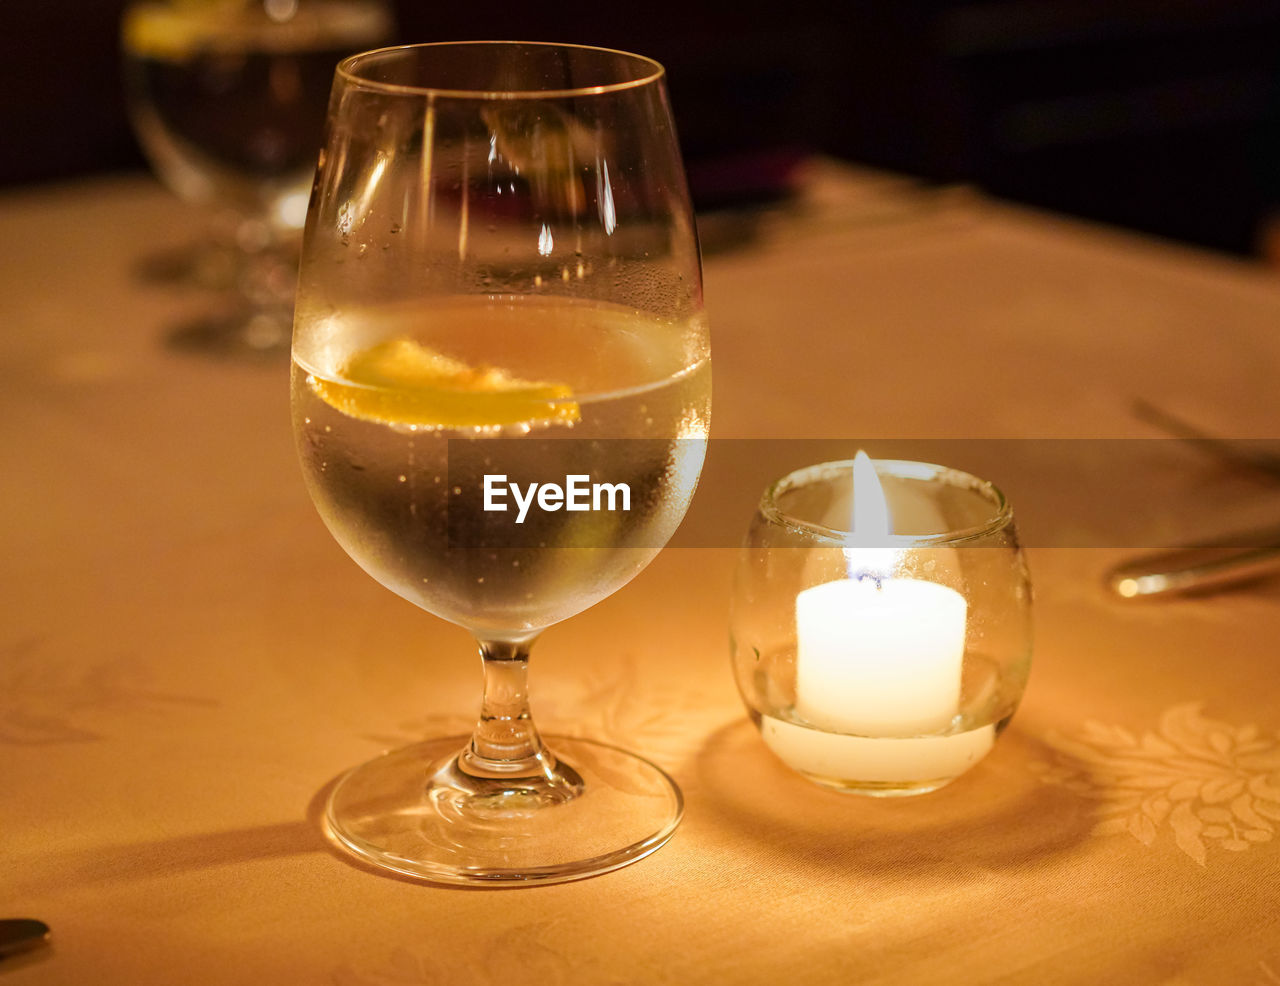 CLOSE-UP OF WINEGLASS ON TABLE